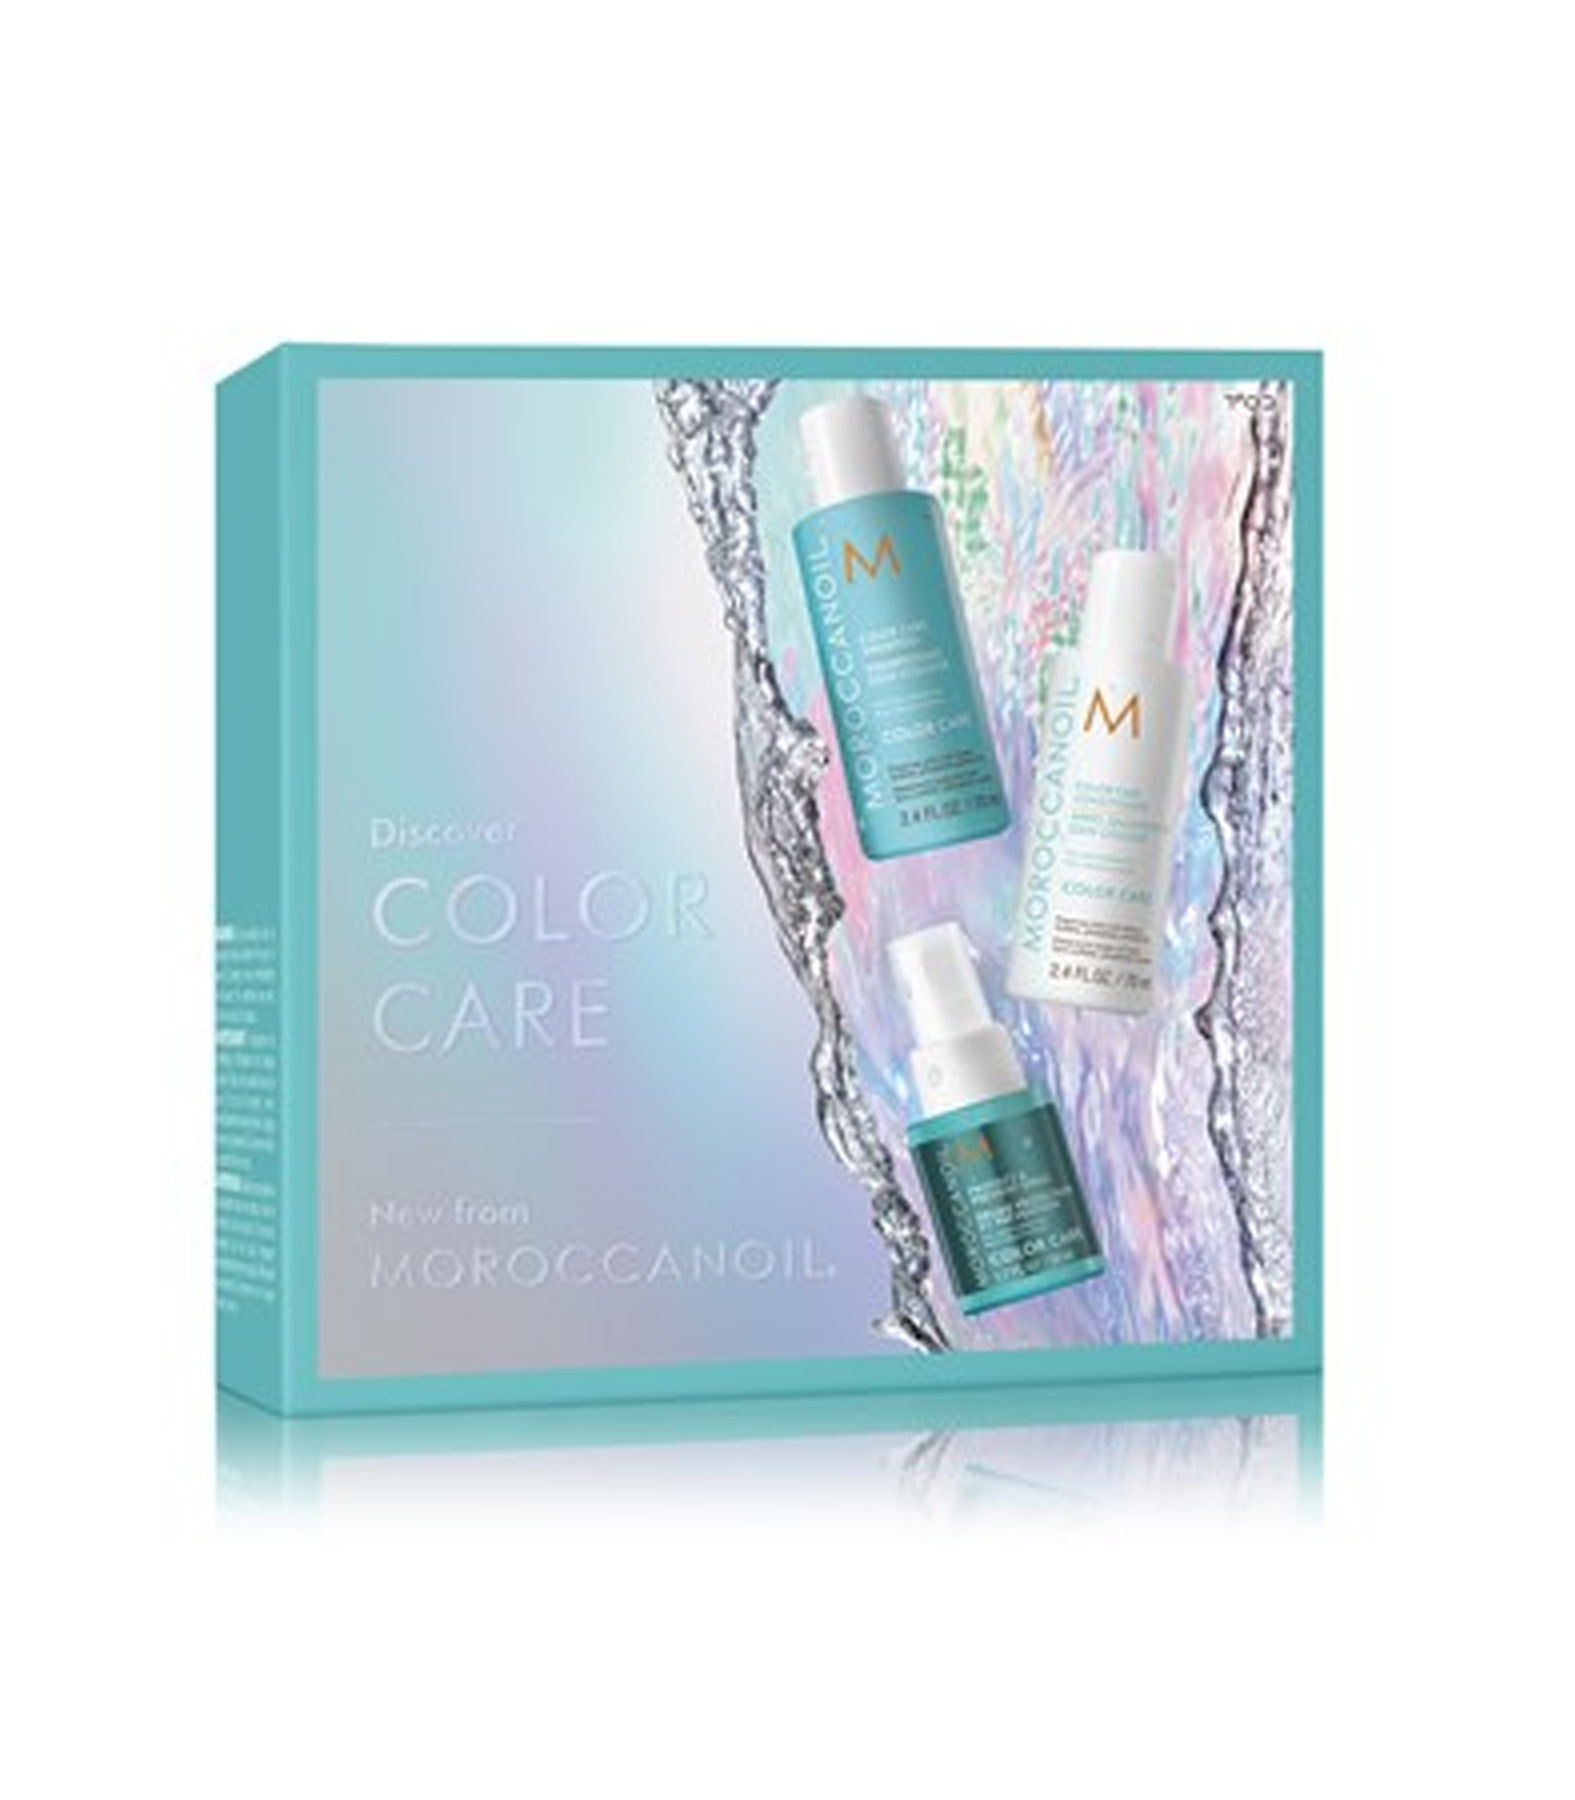 Moroccanoil-Color-Care-Discovery-Kit